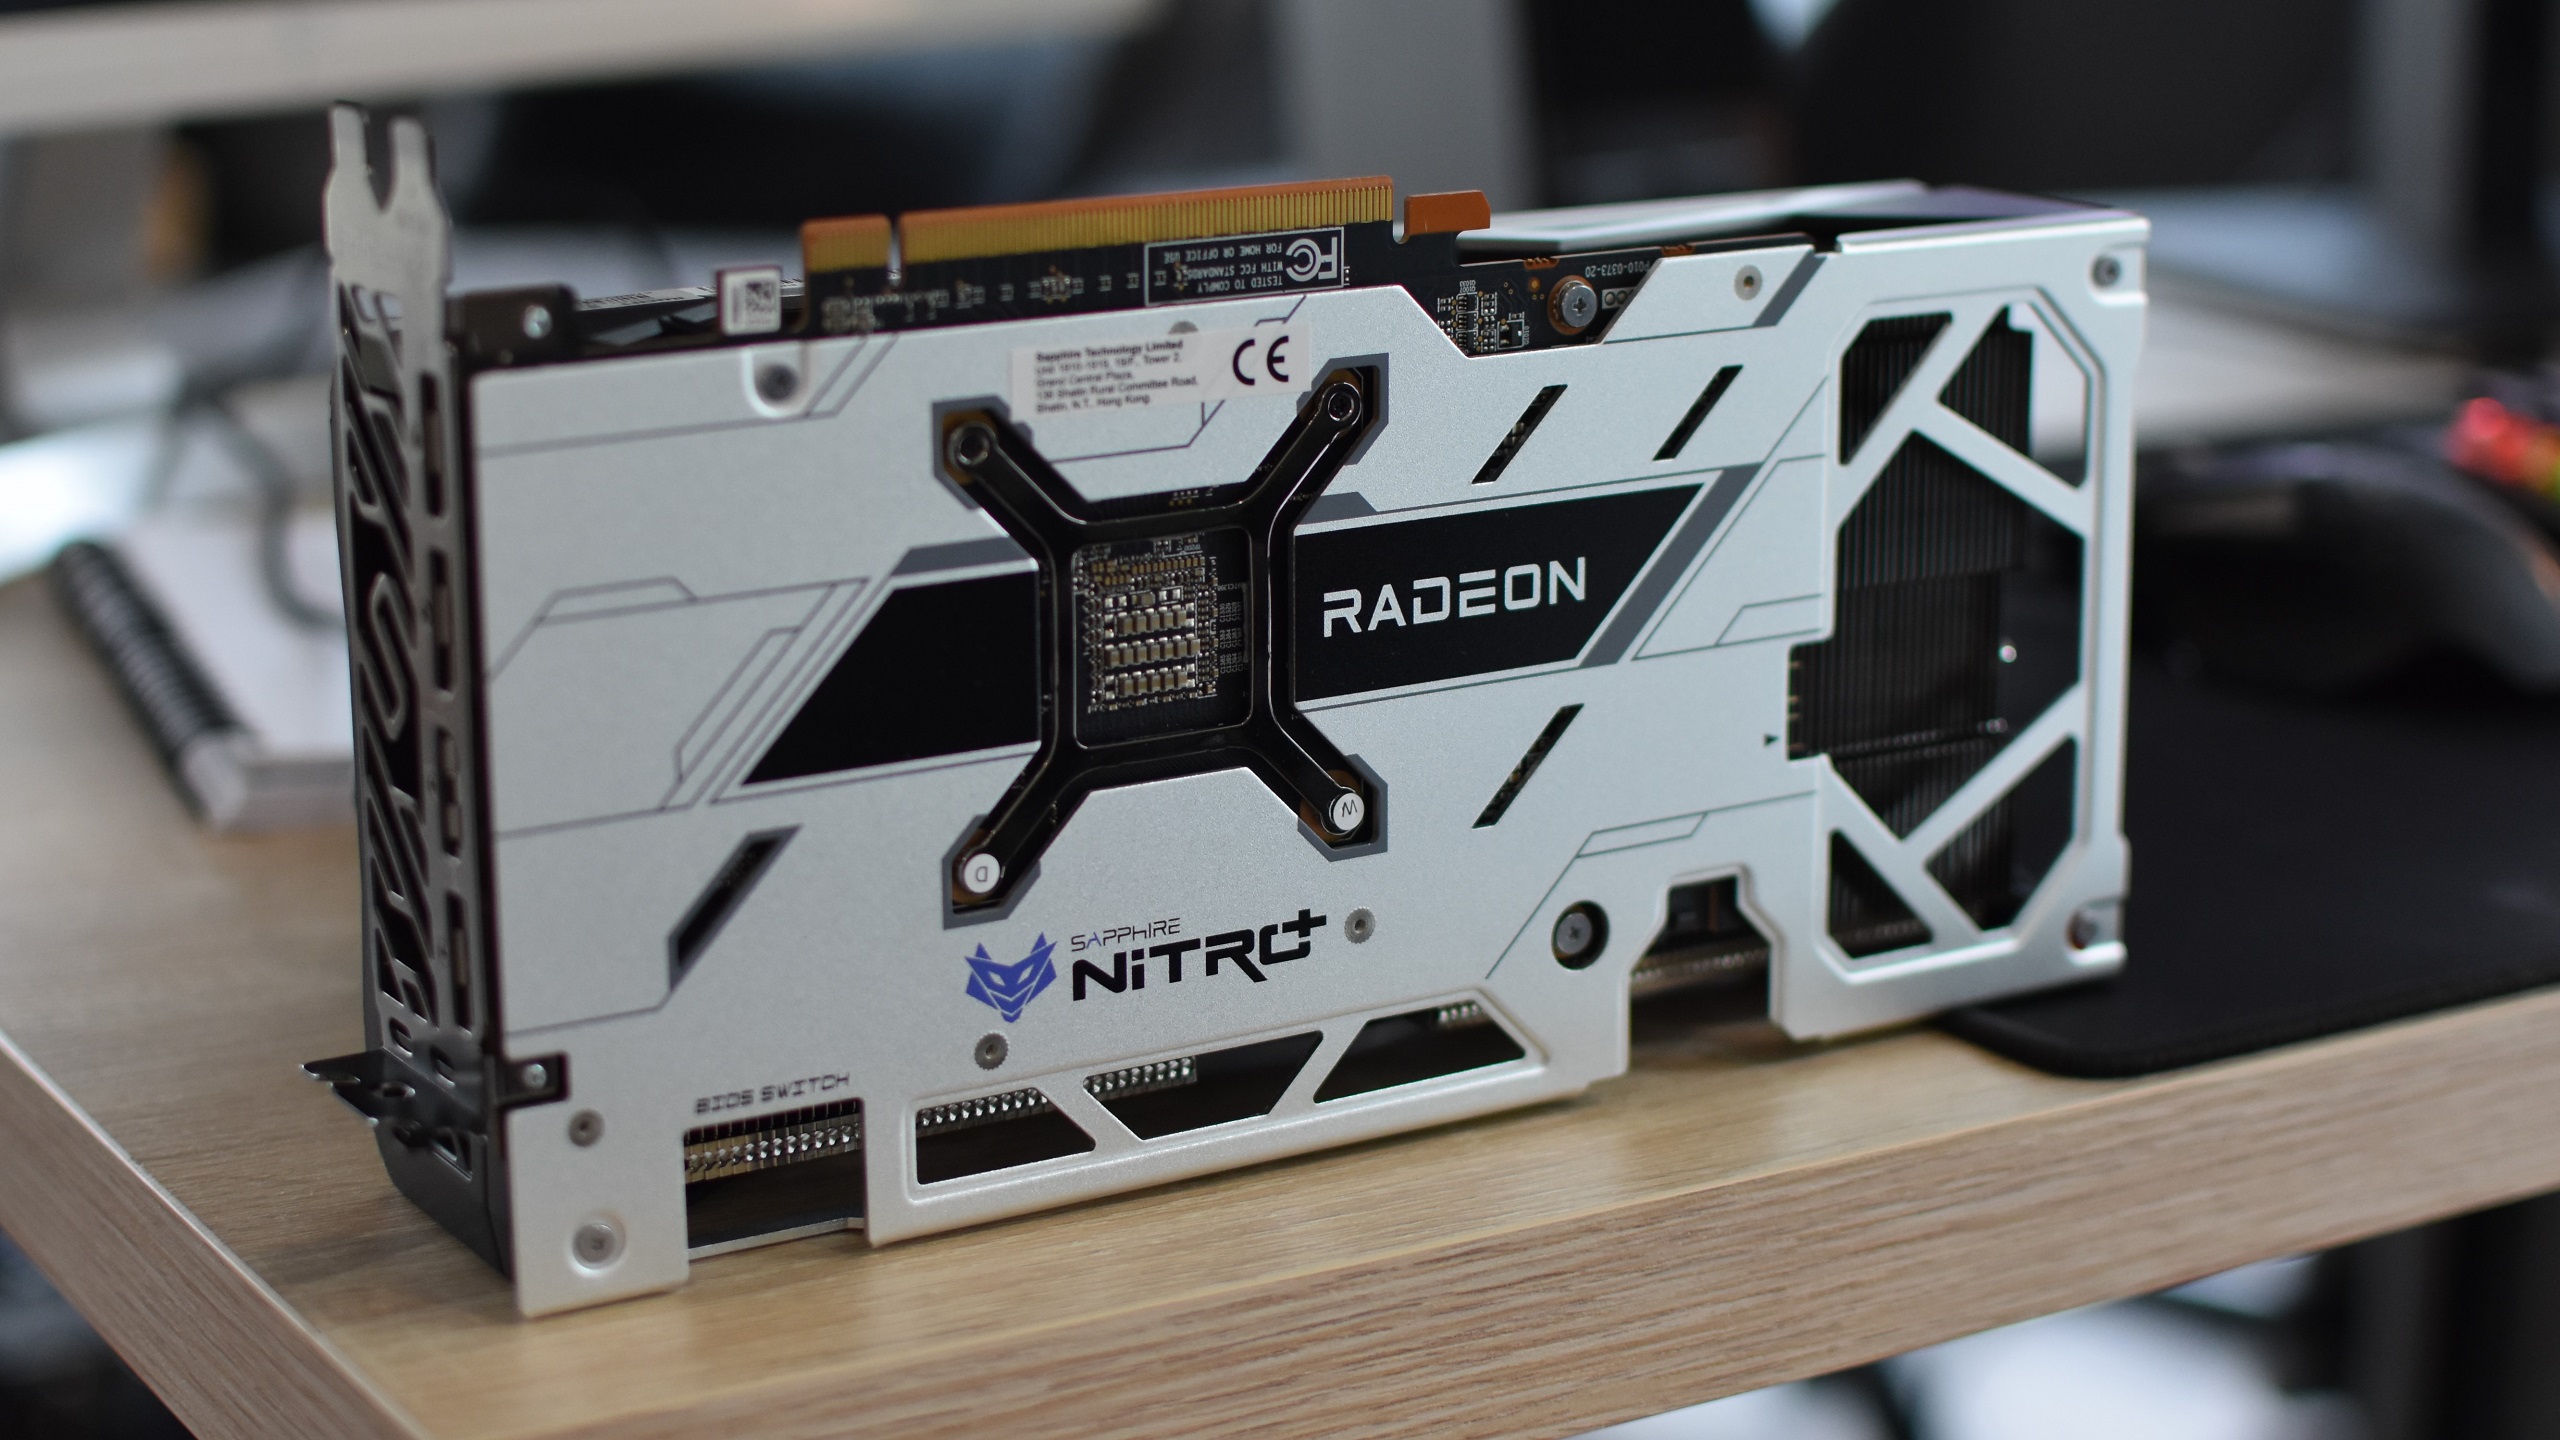 The Sapphire Nitro+ Radeon RX 6650 XT graphics card, sat sideways with its backplate showing, on a desk.